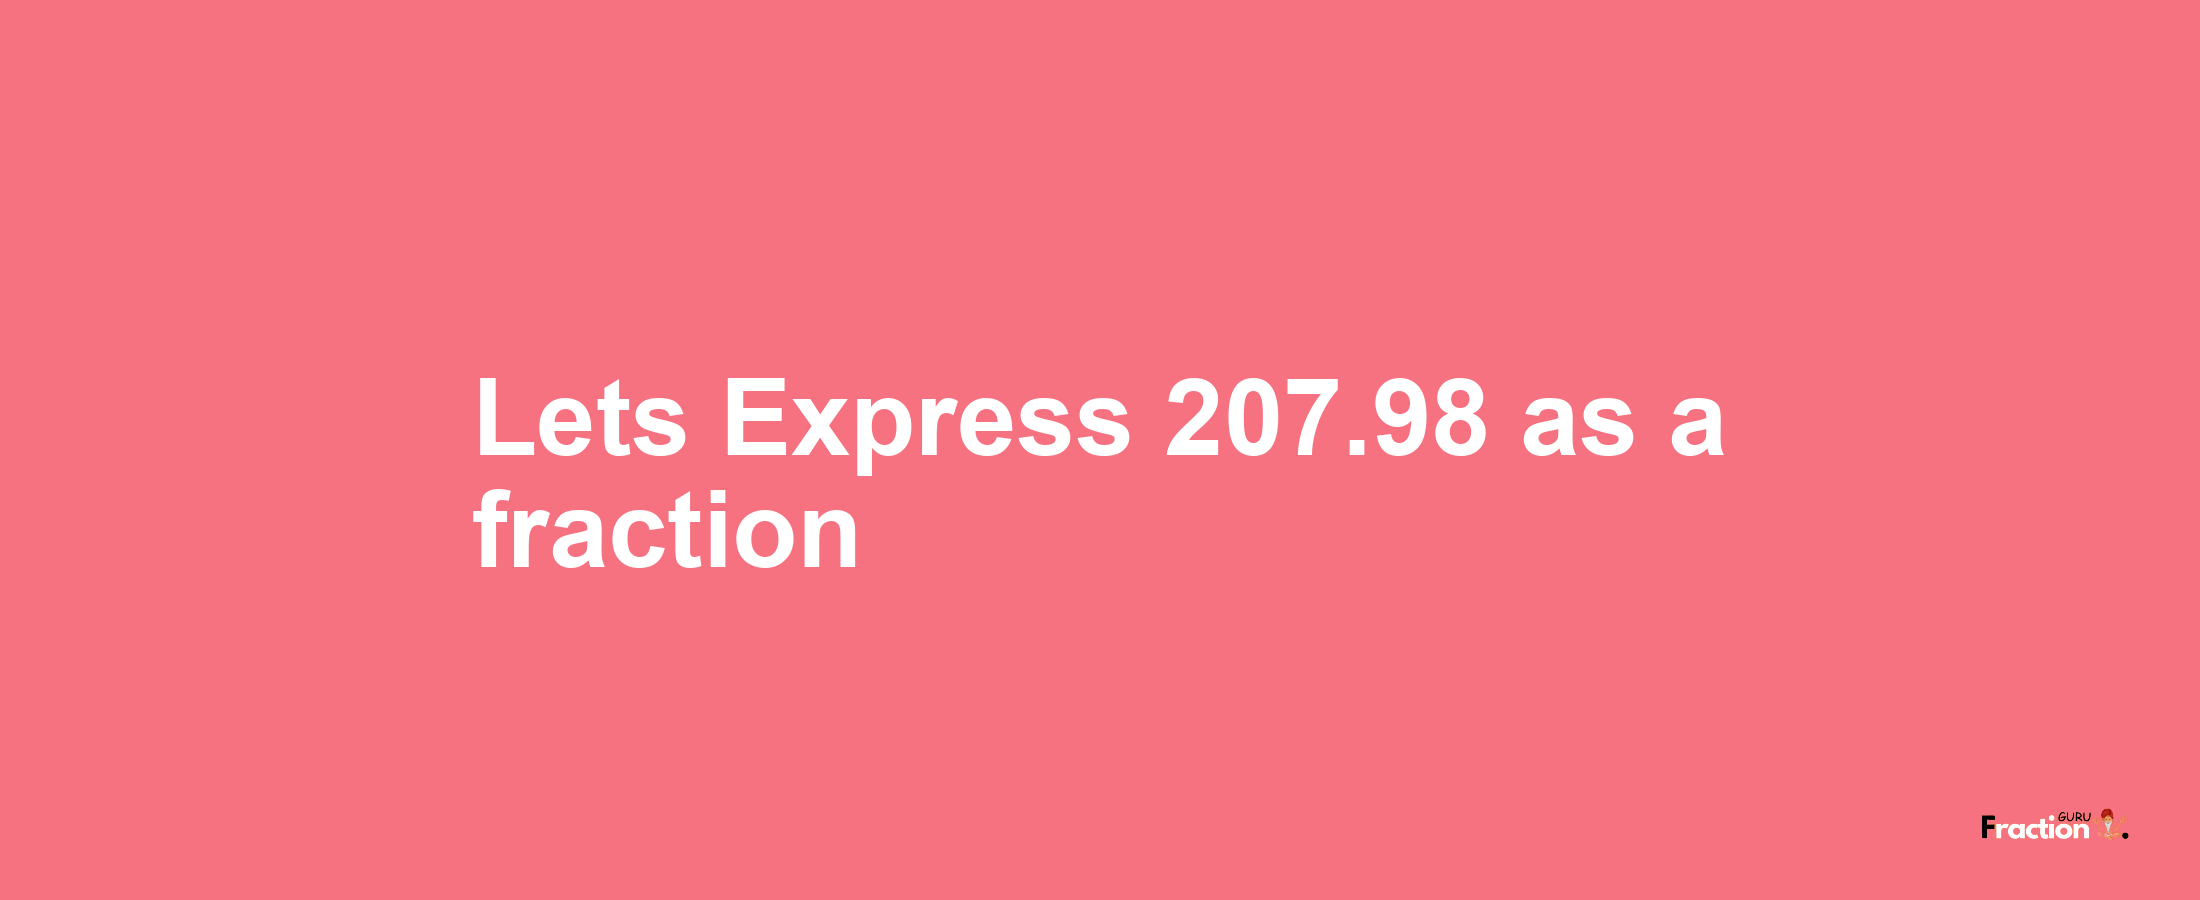 Lets Express 207.98 as afraction